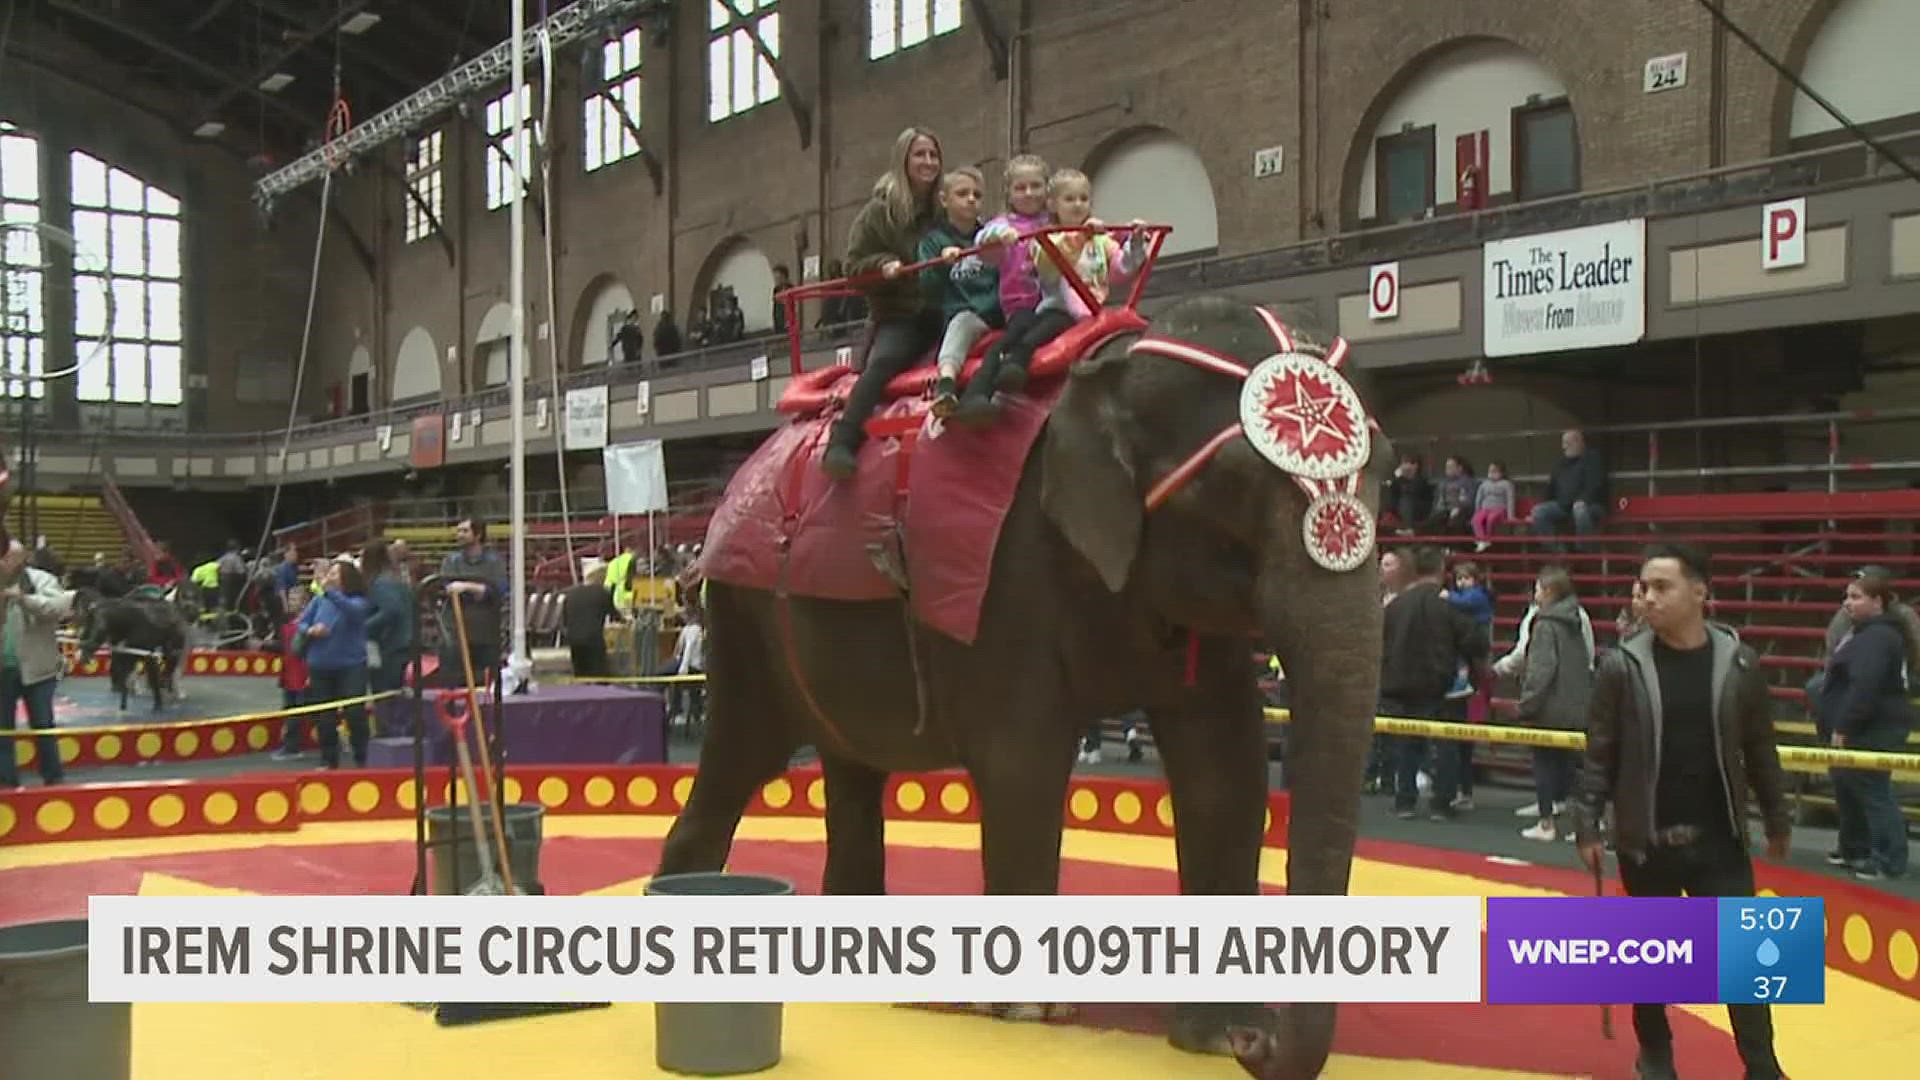 The Irem Shrine Circus is back for its 71st season after a two-year hiatus.